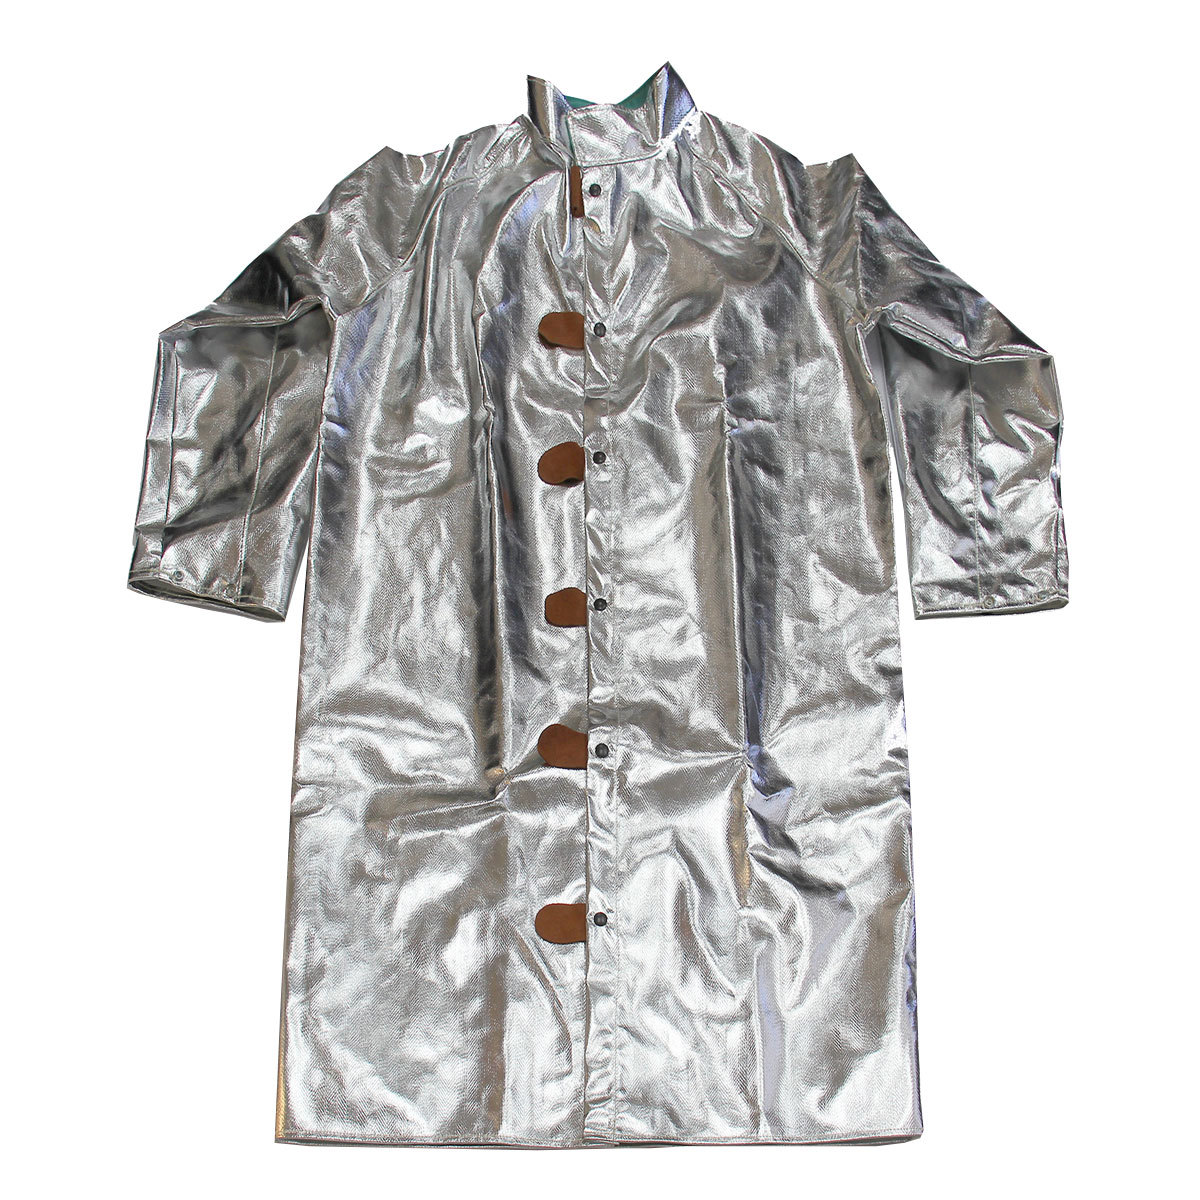 Chicago Protective Apparel Large Silver Aluminized Rayon Heat Resistant Coat